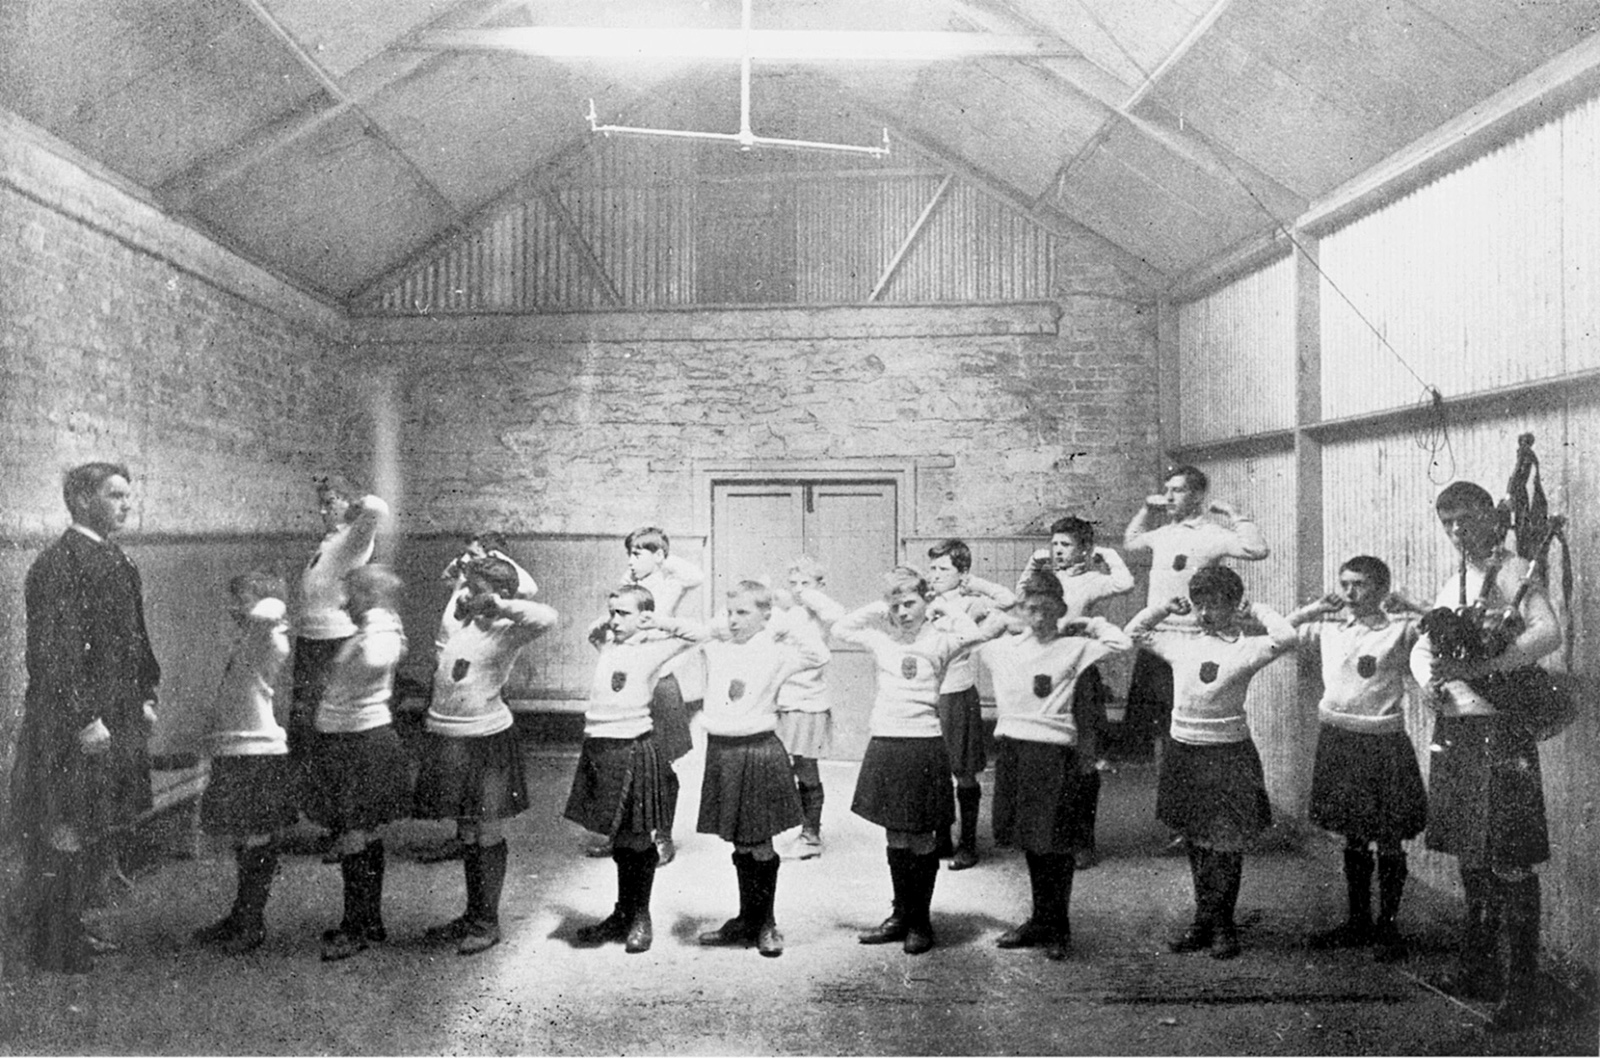 Students being drilled at St. Enda’s, the school founded by Patrick Pearse, Dublin, circa 1910. The teacher leading them is probably Con Colbert, who was later executed for his part in the Easter Rising.